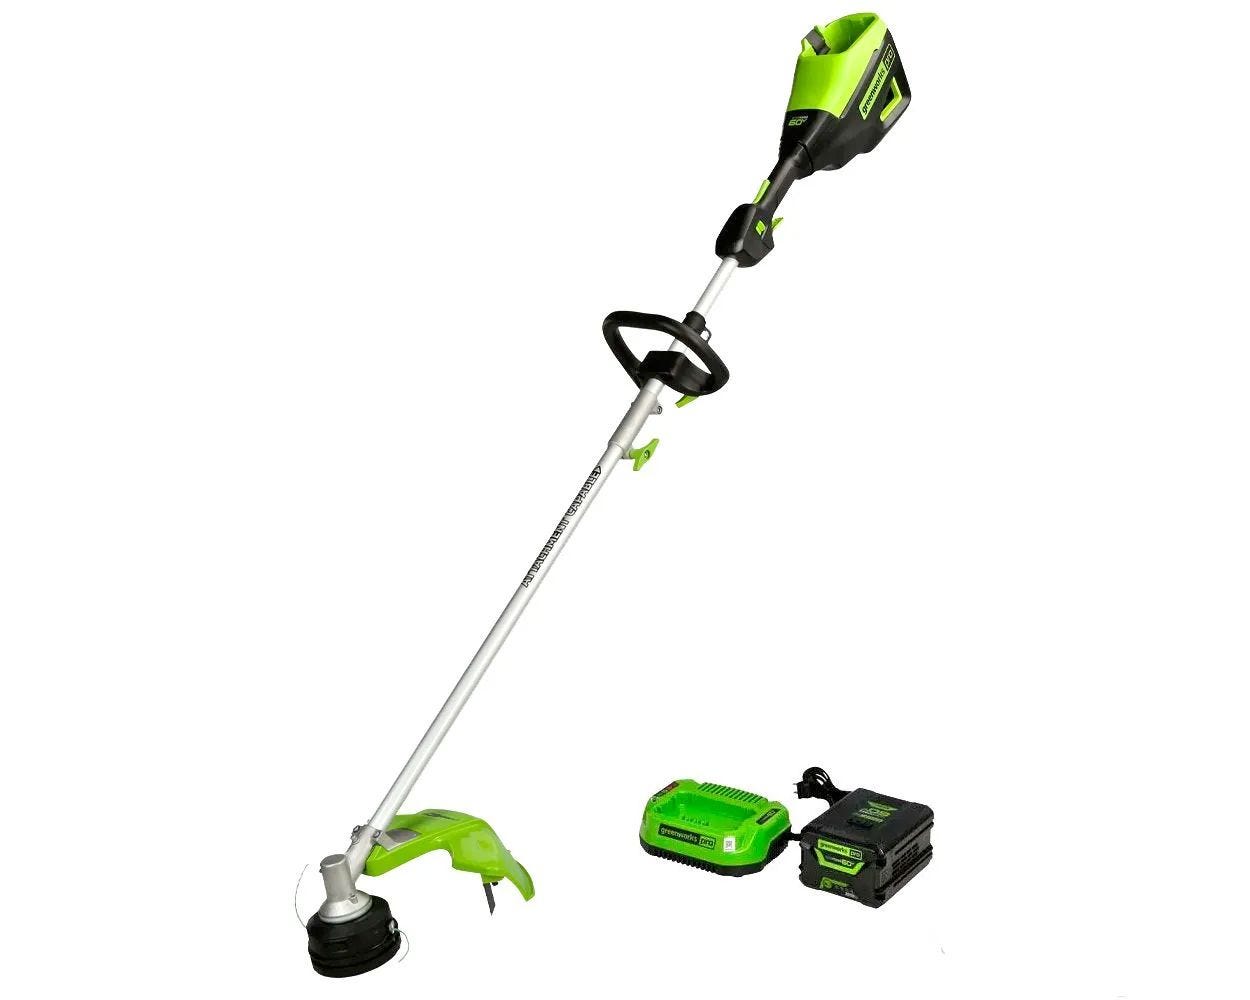 60V 16" Cordless Battery String Trimmer (Attachment Capable) & 5 Pcs Attachments Combo Kit w/ 4.0 Ah Battery & Charger